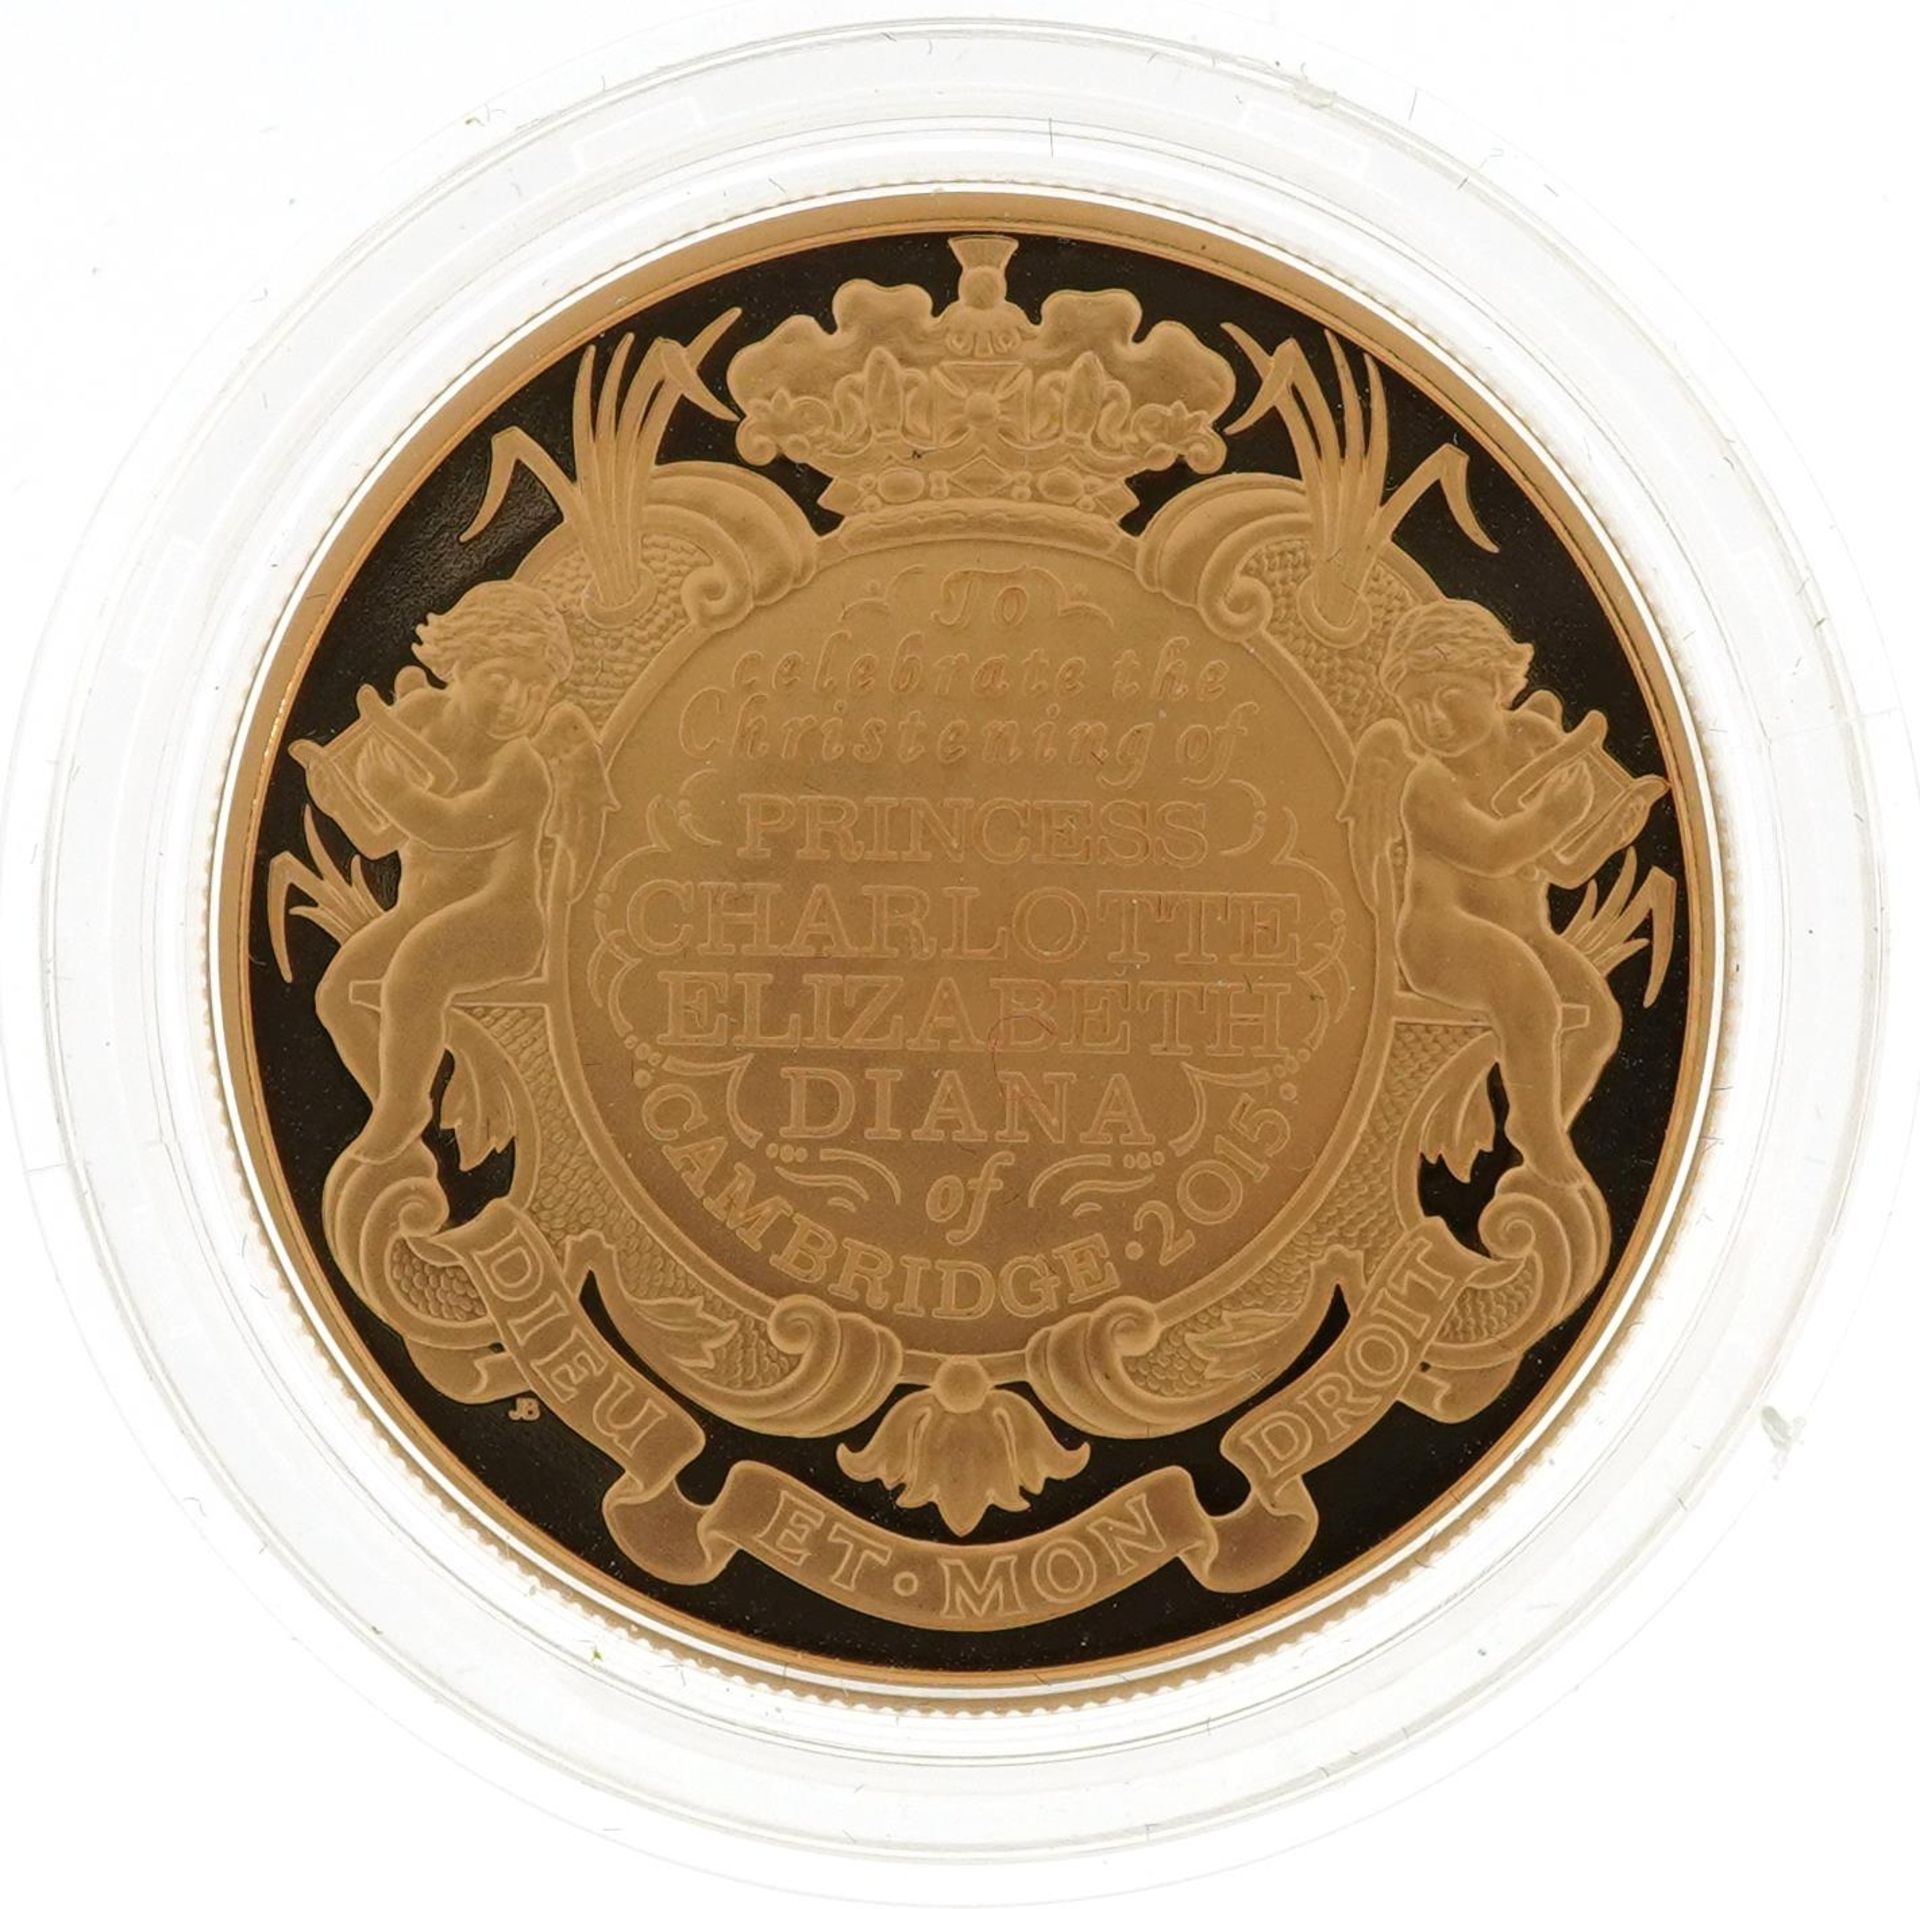 Elizabeth II 2015 gold proof five pound coin commemorating the christening of HRH Princess Charlotte - Image 2 of 4